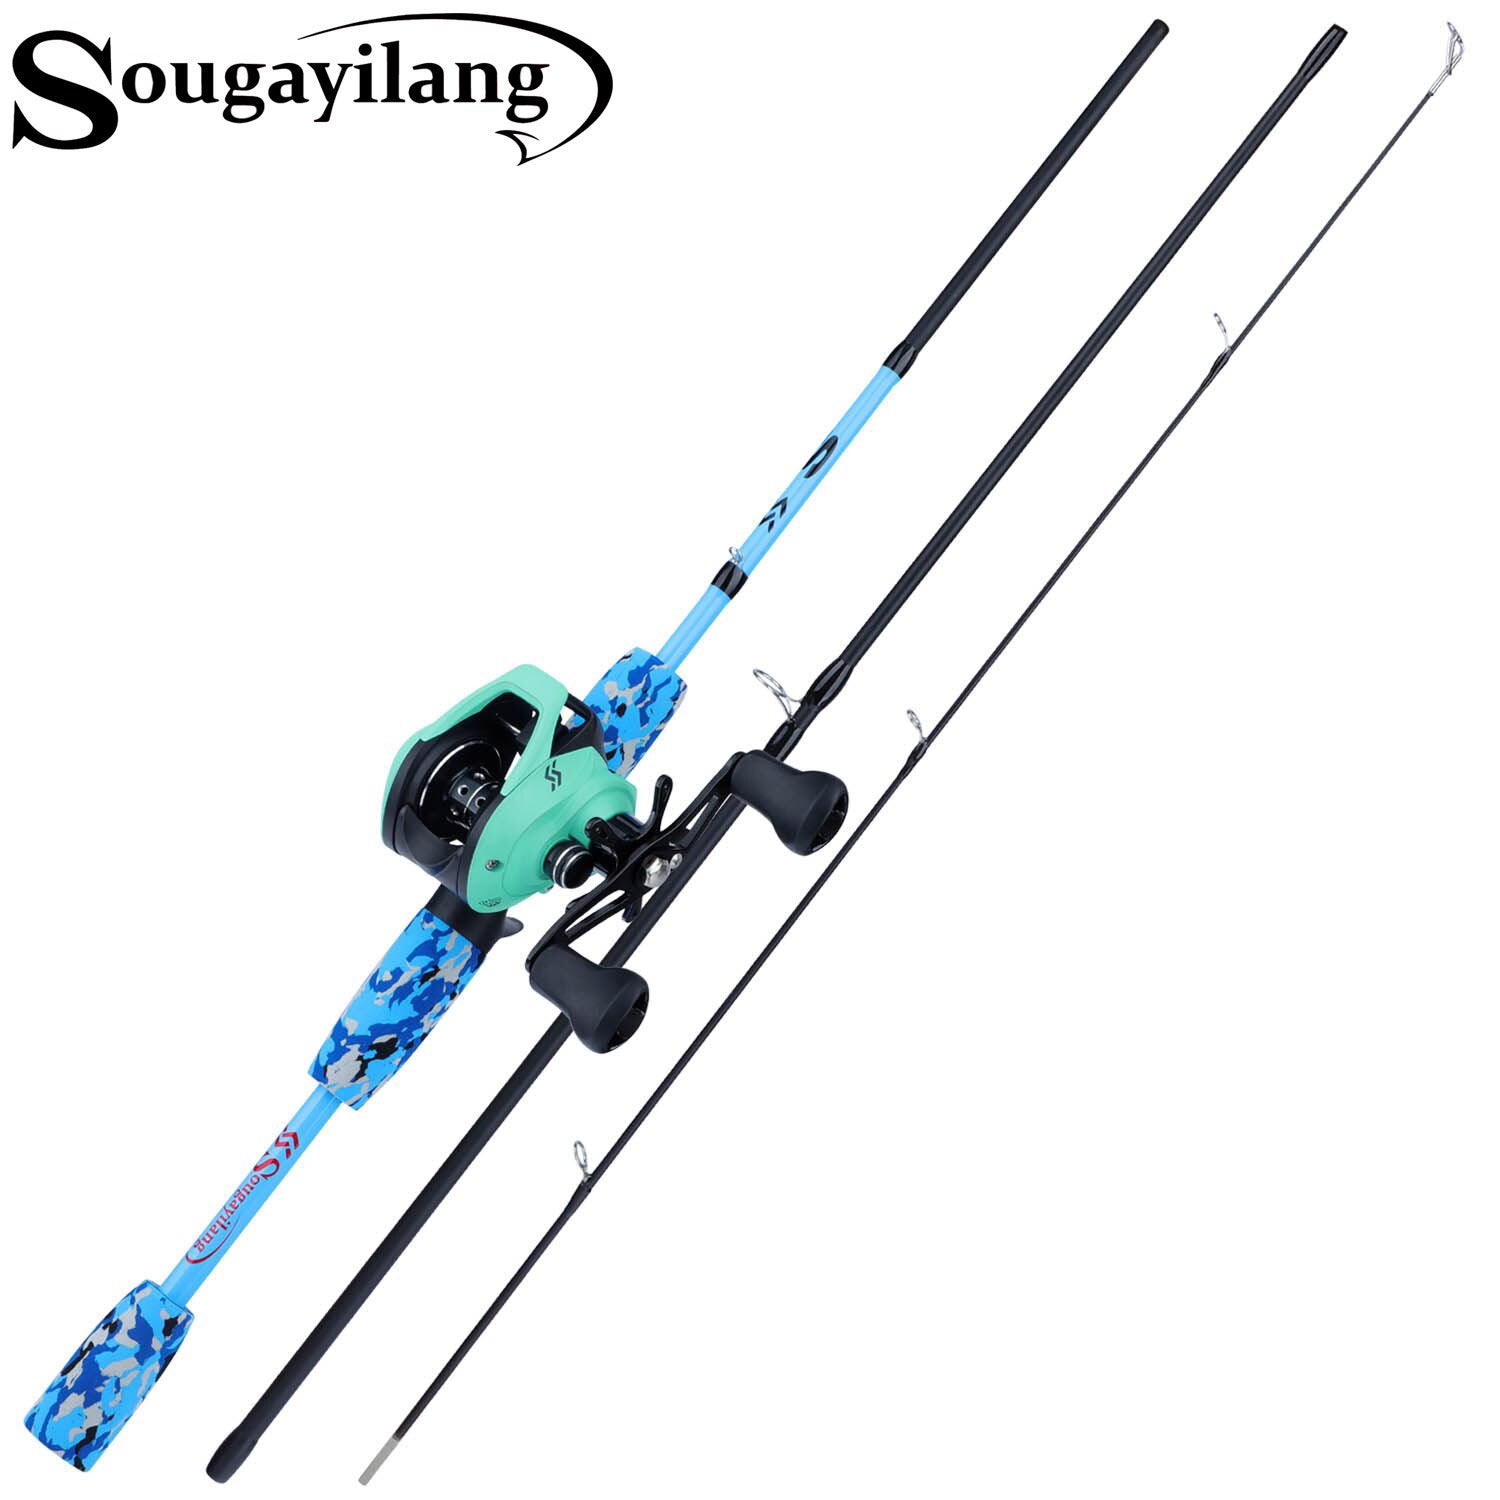 Sougayilang HBS Fishing Gear Combos with Carrier Bag